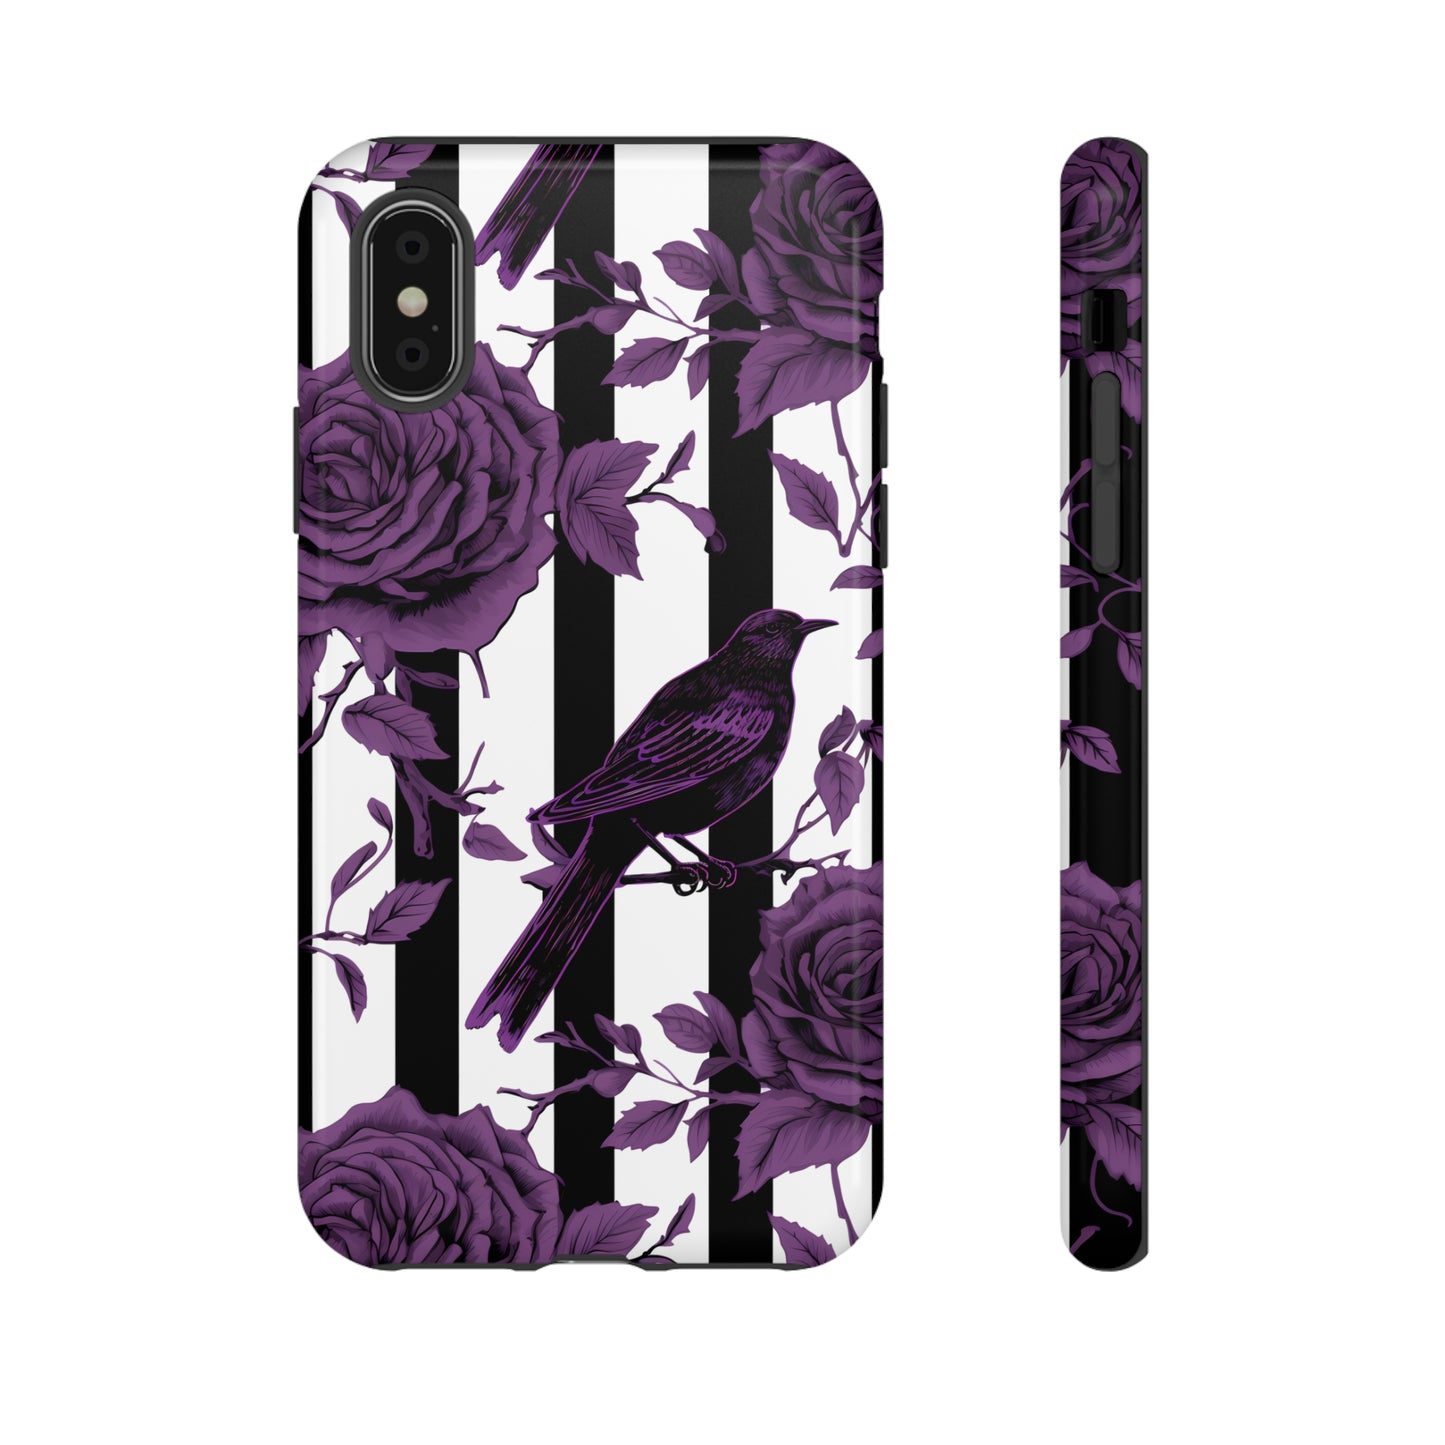 Striped Crows and Roses Tough Cases for iPhone Samsung Google PhonesPhone CaseVTZdesignsiPhone XGlossyAccessoriescrowsGlossy